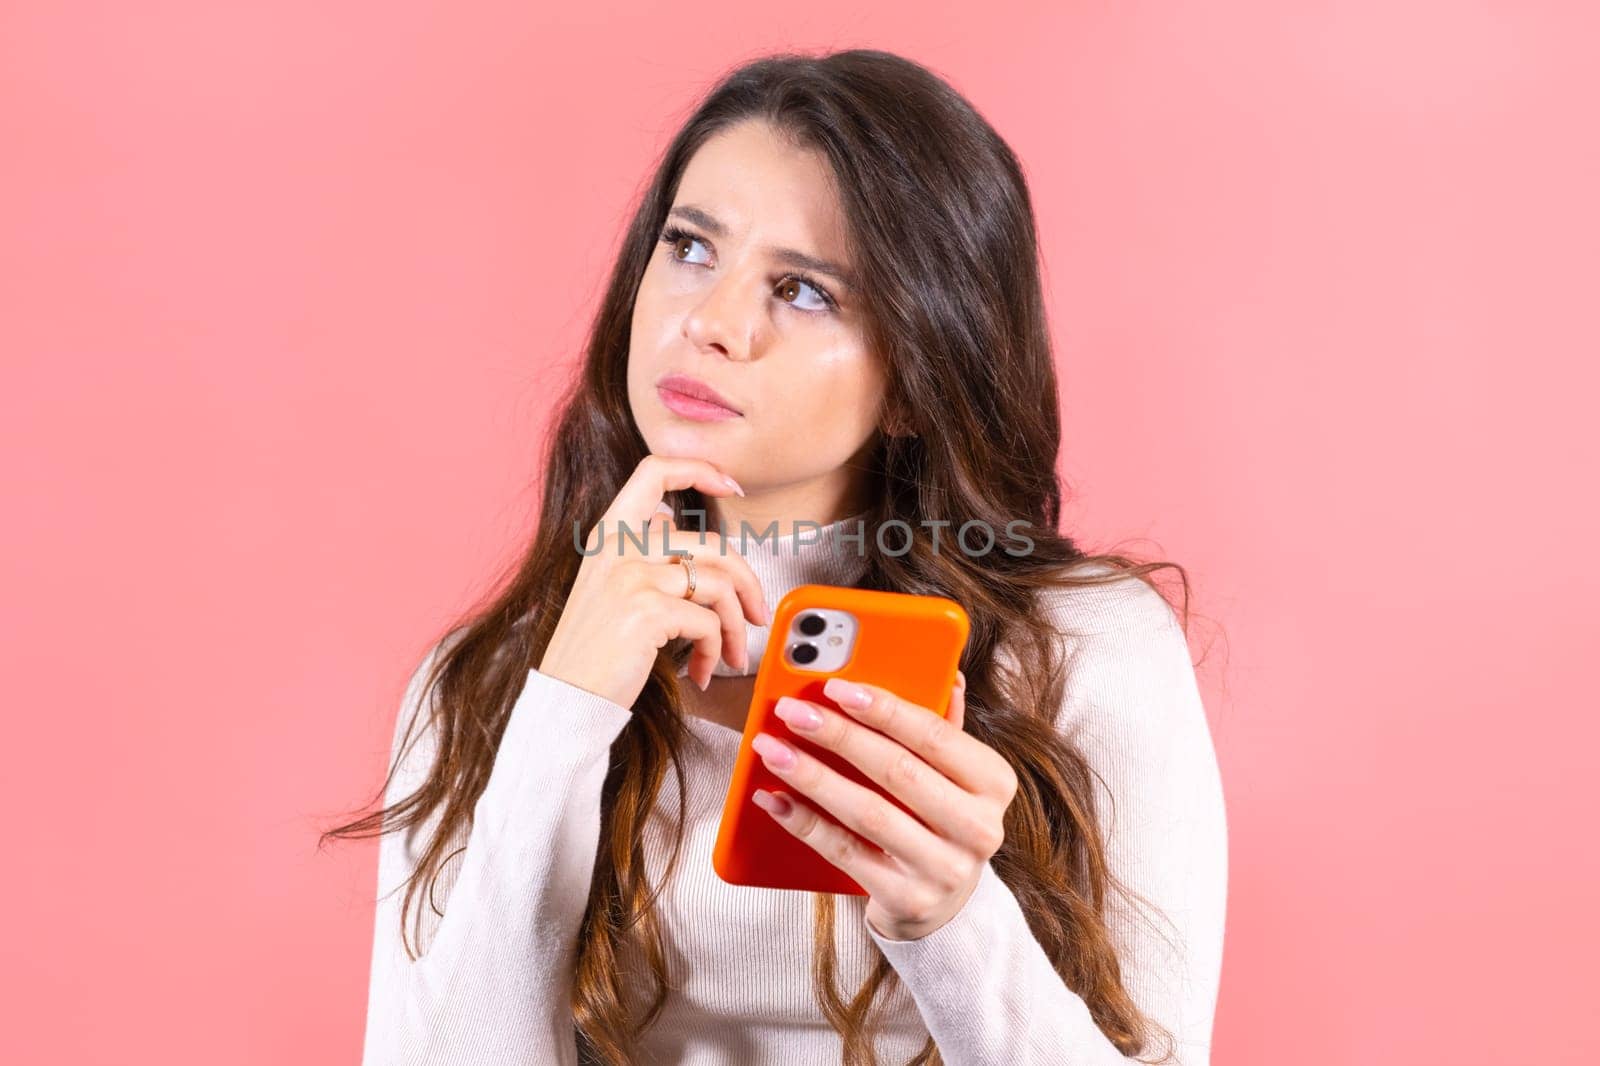 Young woman with amused and smiling expression enjoys scrolling social media on orange smartphone. Long-haired brunette lady smiles looking at feeds